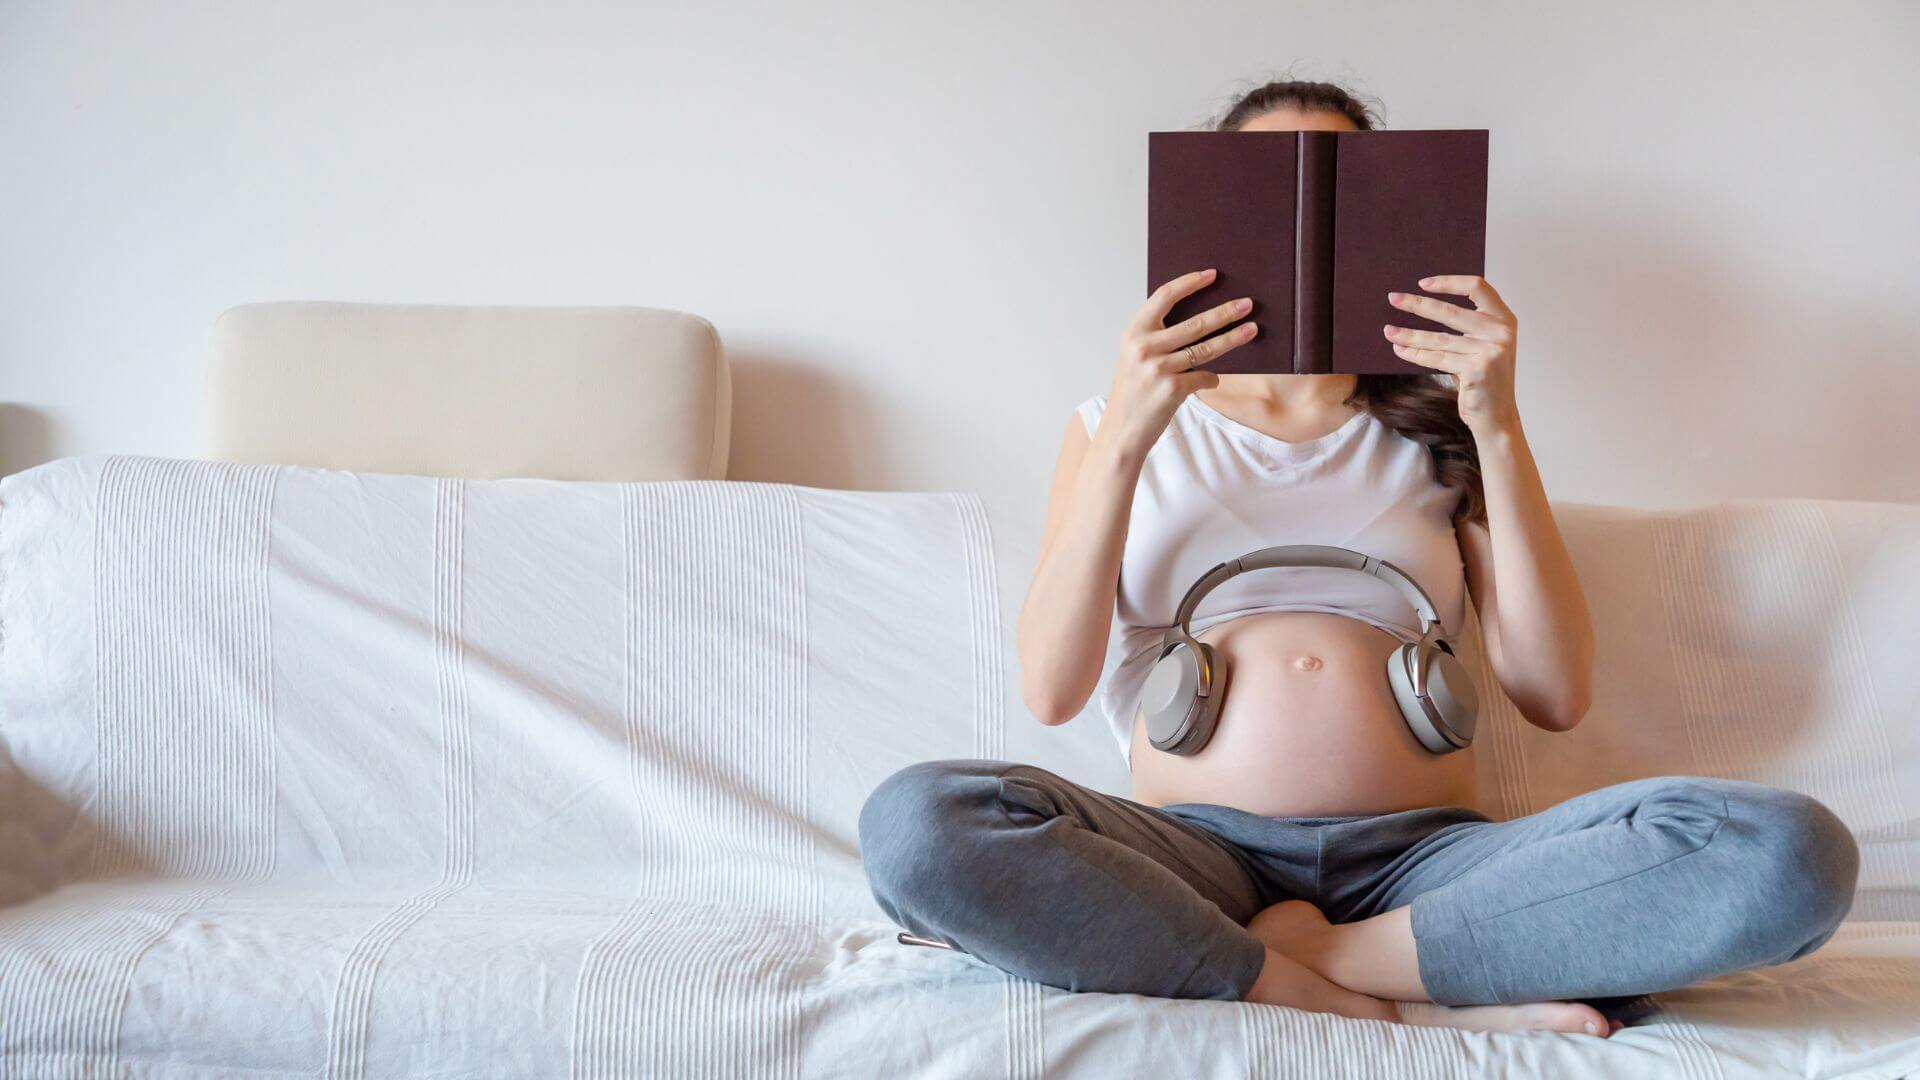 So What Books Should I Read to My Baby While Pregnant